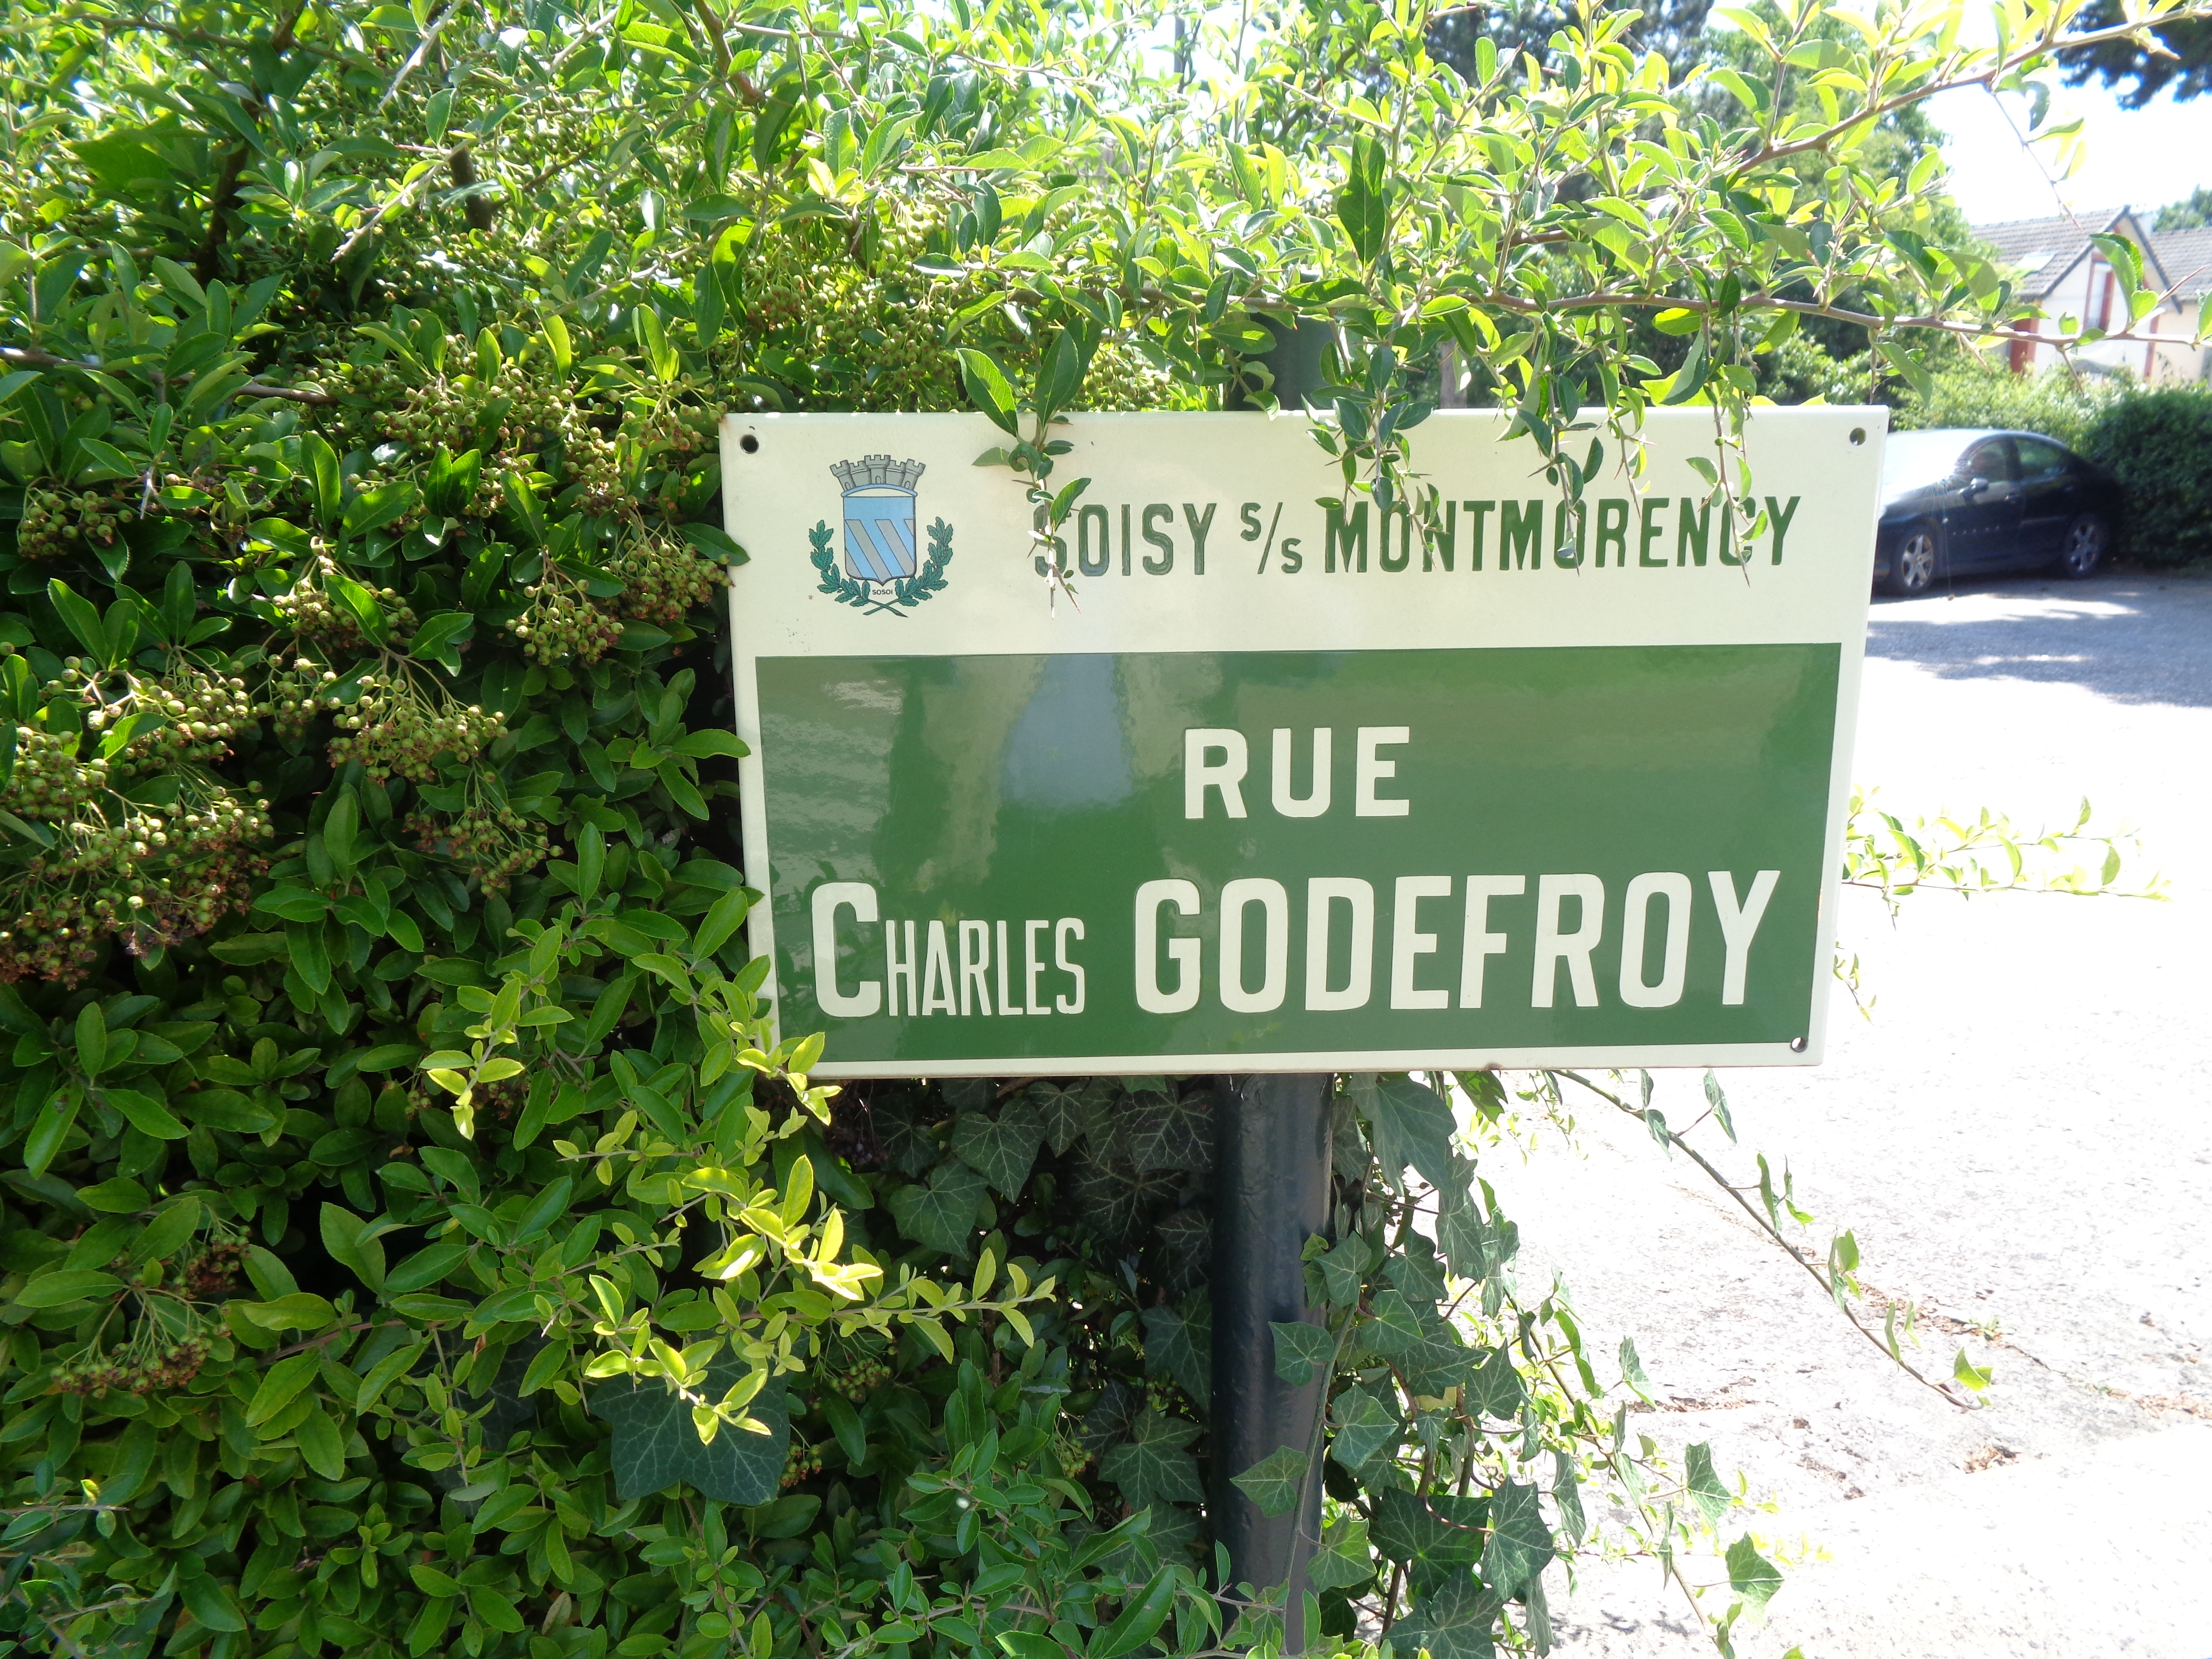 rue Charles Godefroy, à Soisy s/s Montmorency.